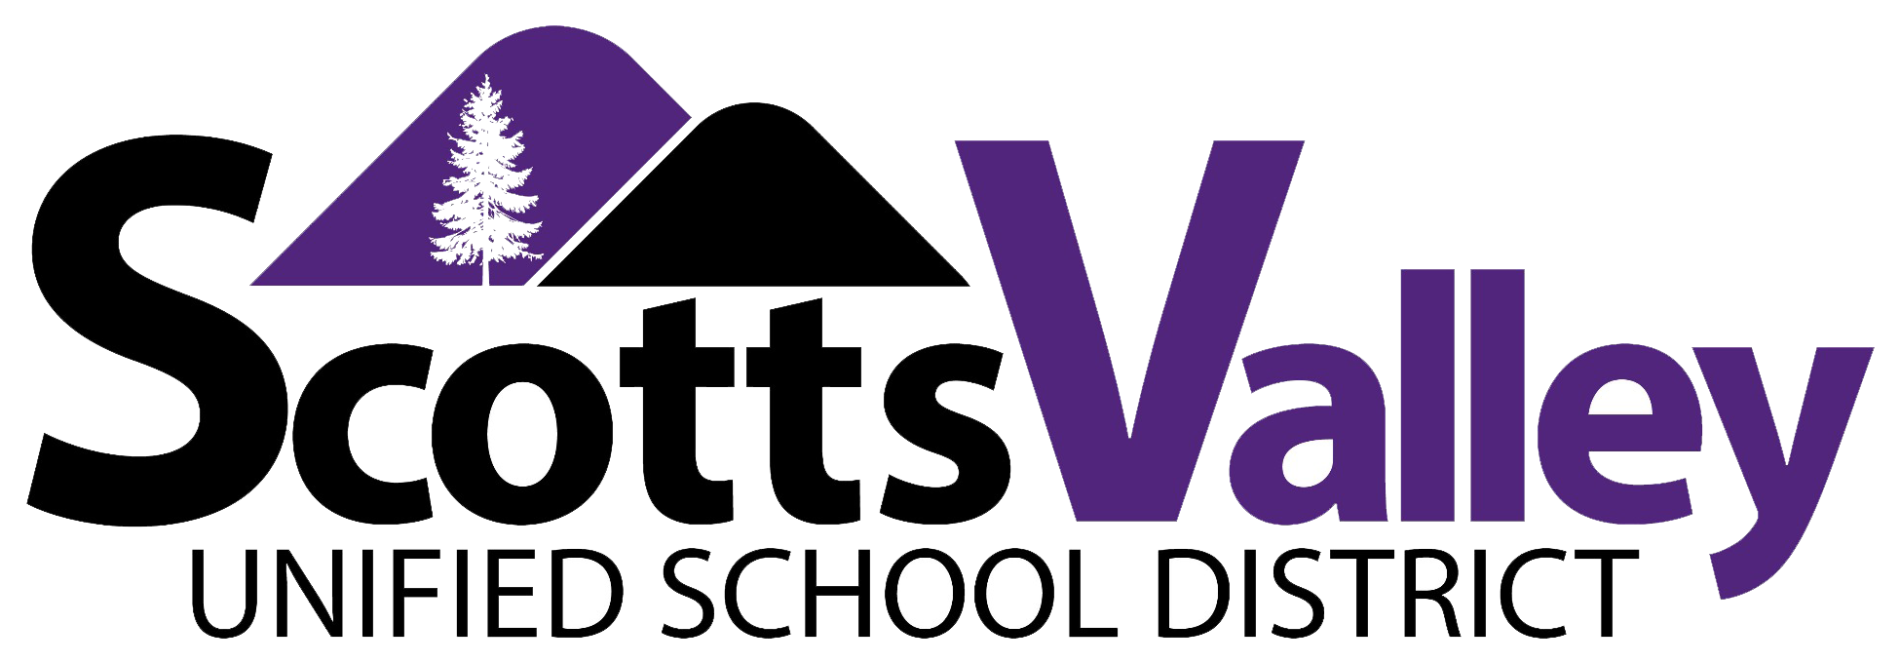 Scotts Valley Unified School District Logo